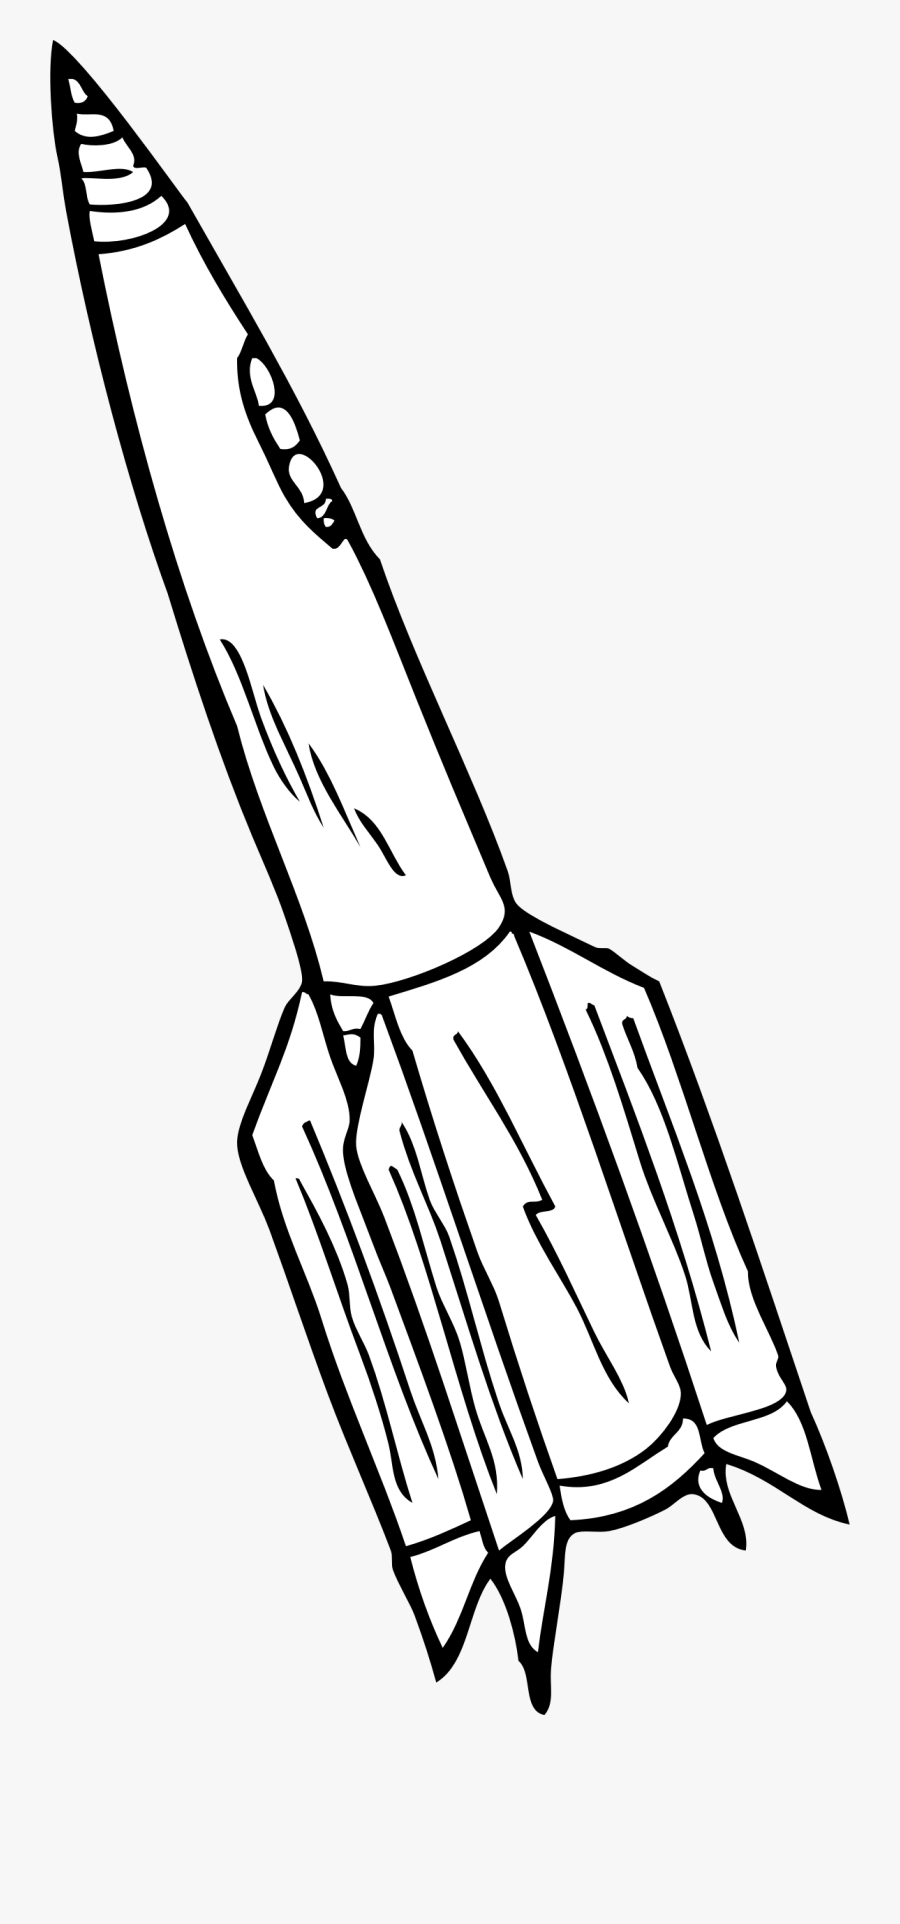 Rocket Clipart Black And White - Rocket Black And White, Transparent Clipart